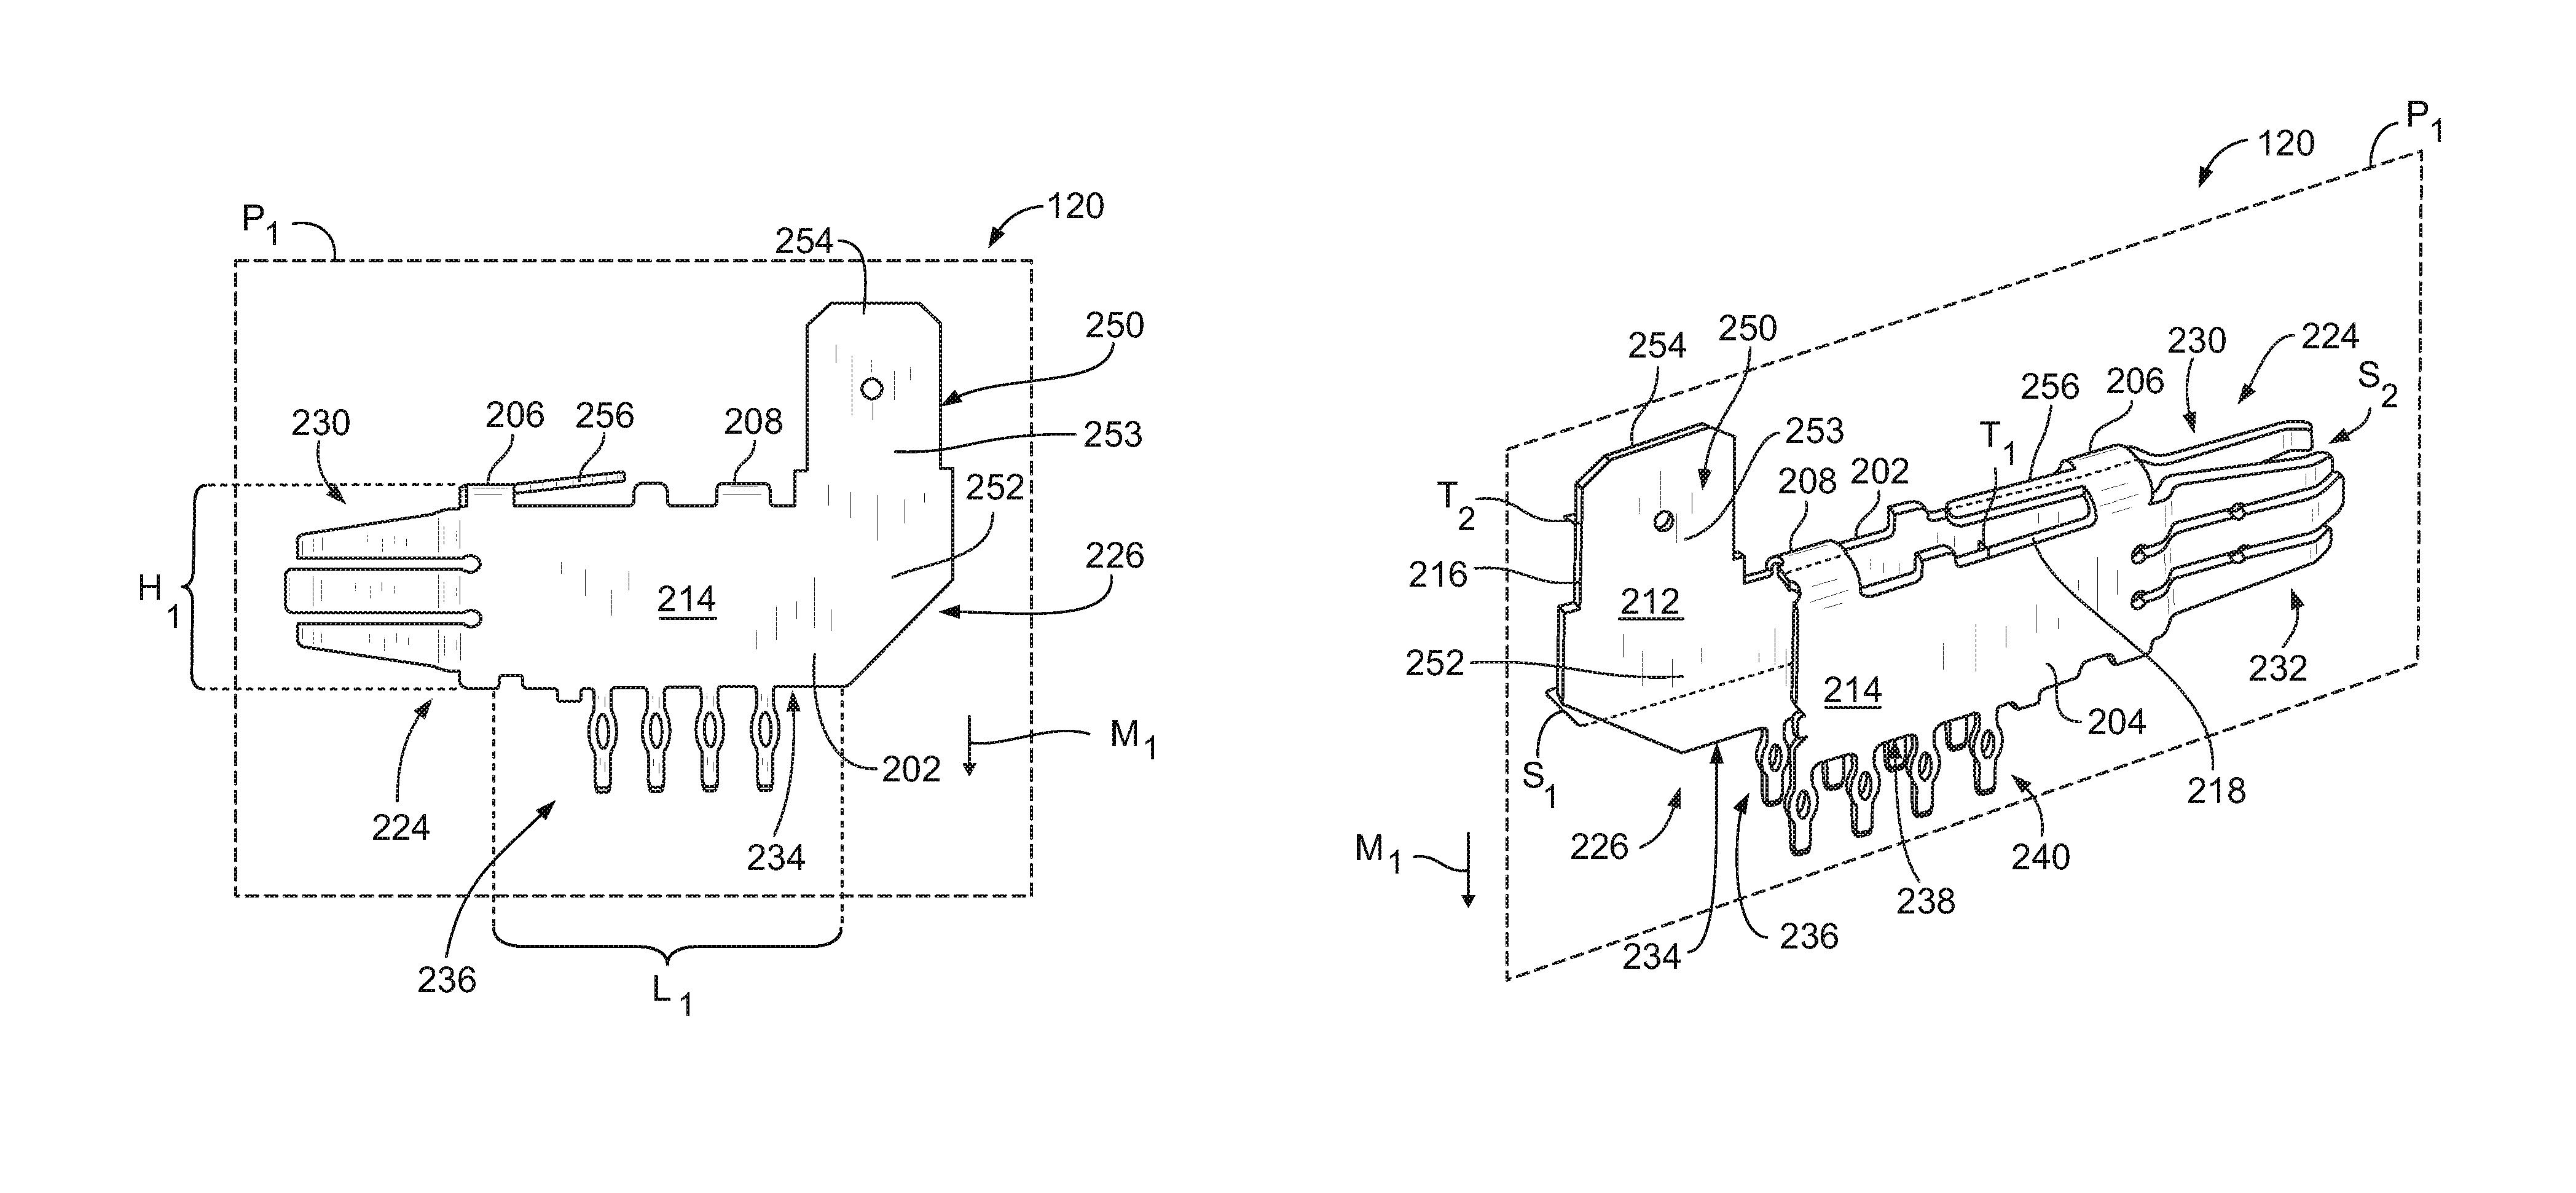 Power connector having a contact configured to transmit electrical power to separate components